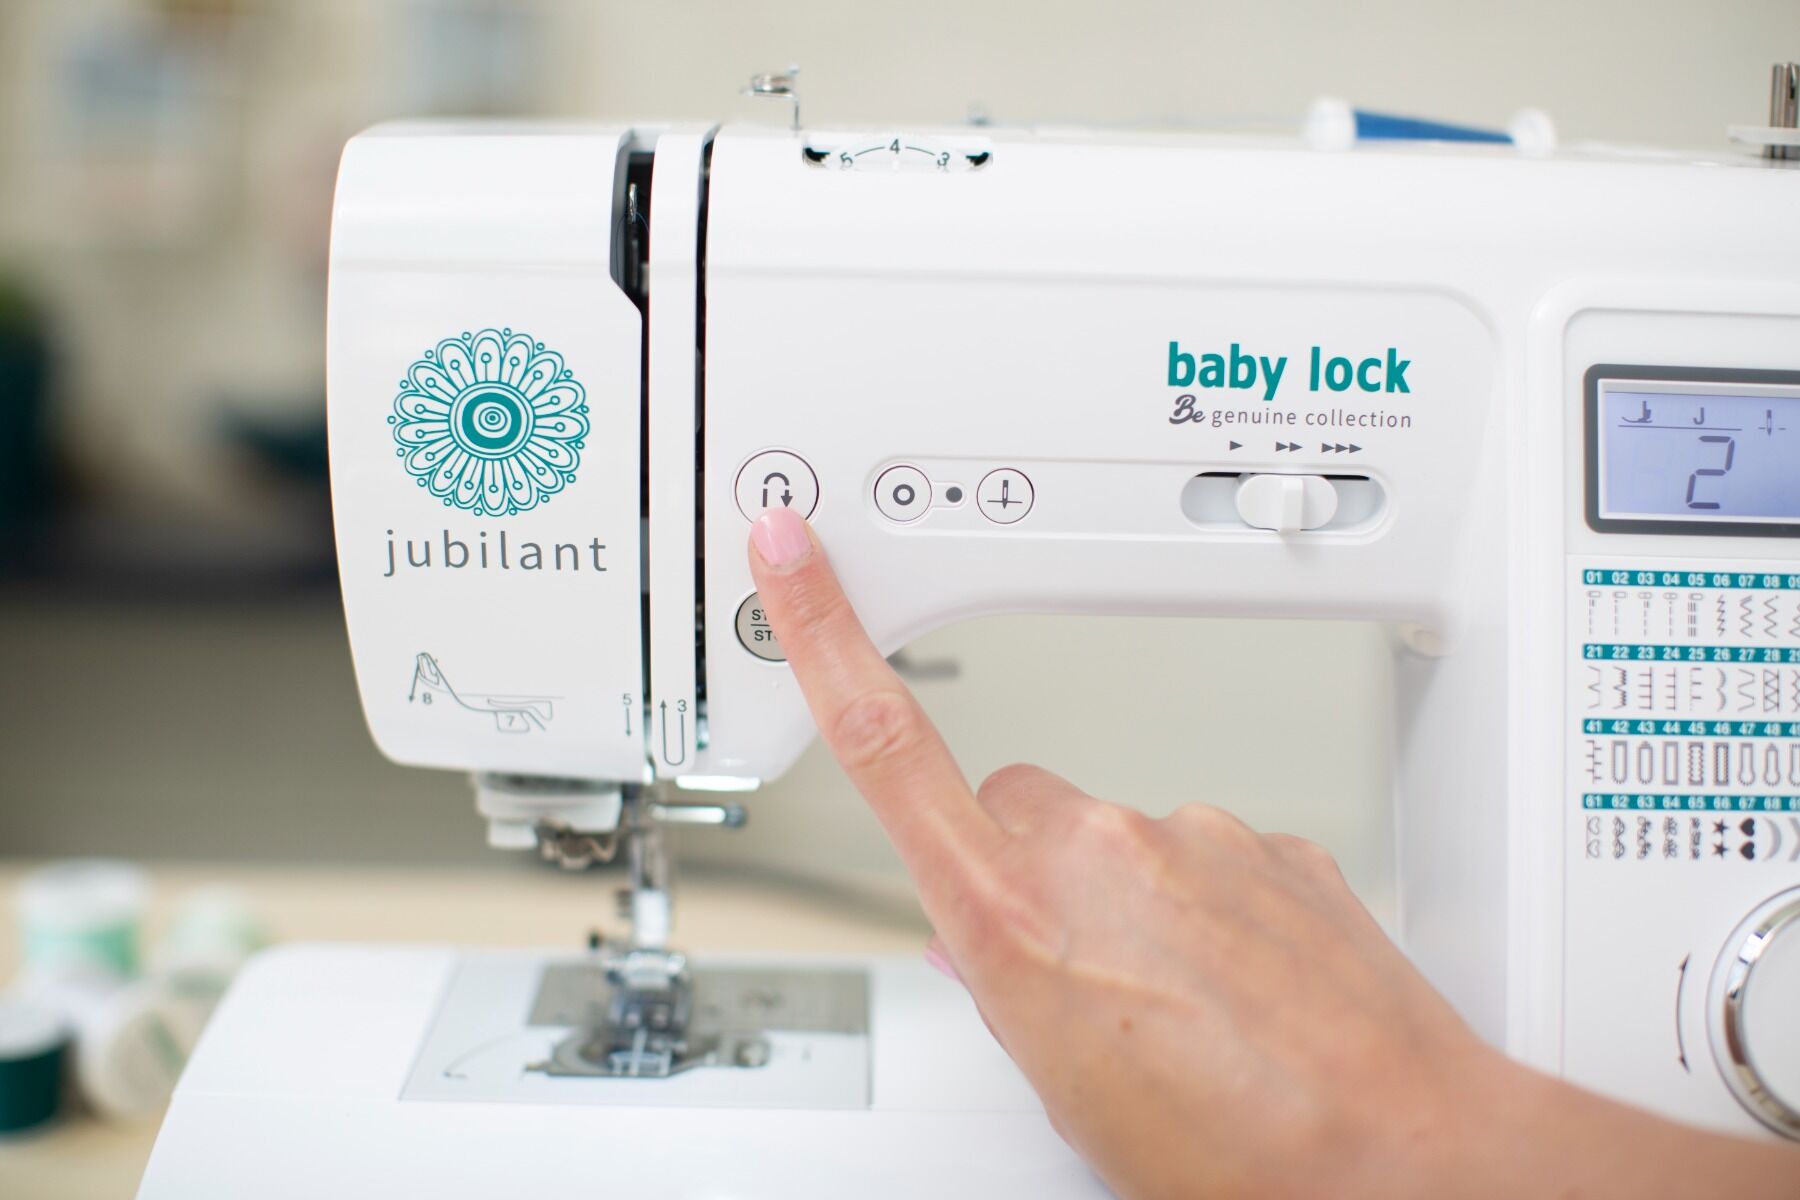 Baby Lock Jubilant Computerized Sewing Machine from the Genuine Collection - with FREE Gifts (BA-LOK60D + 804BLTK20)